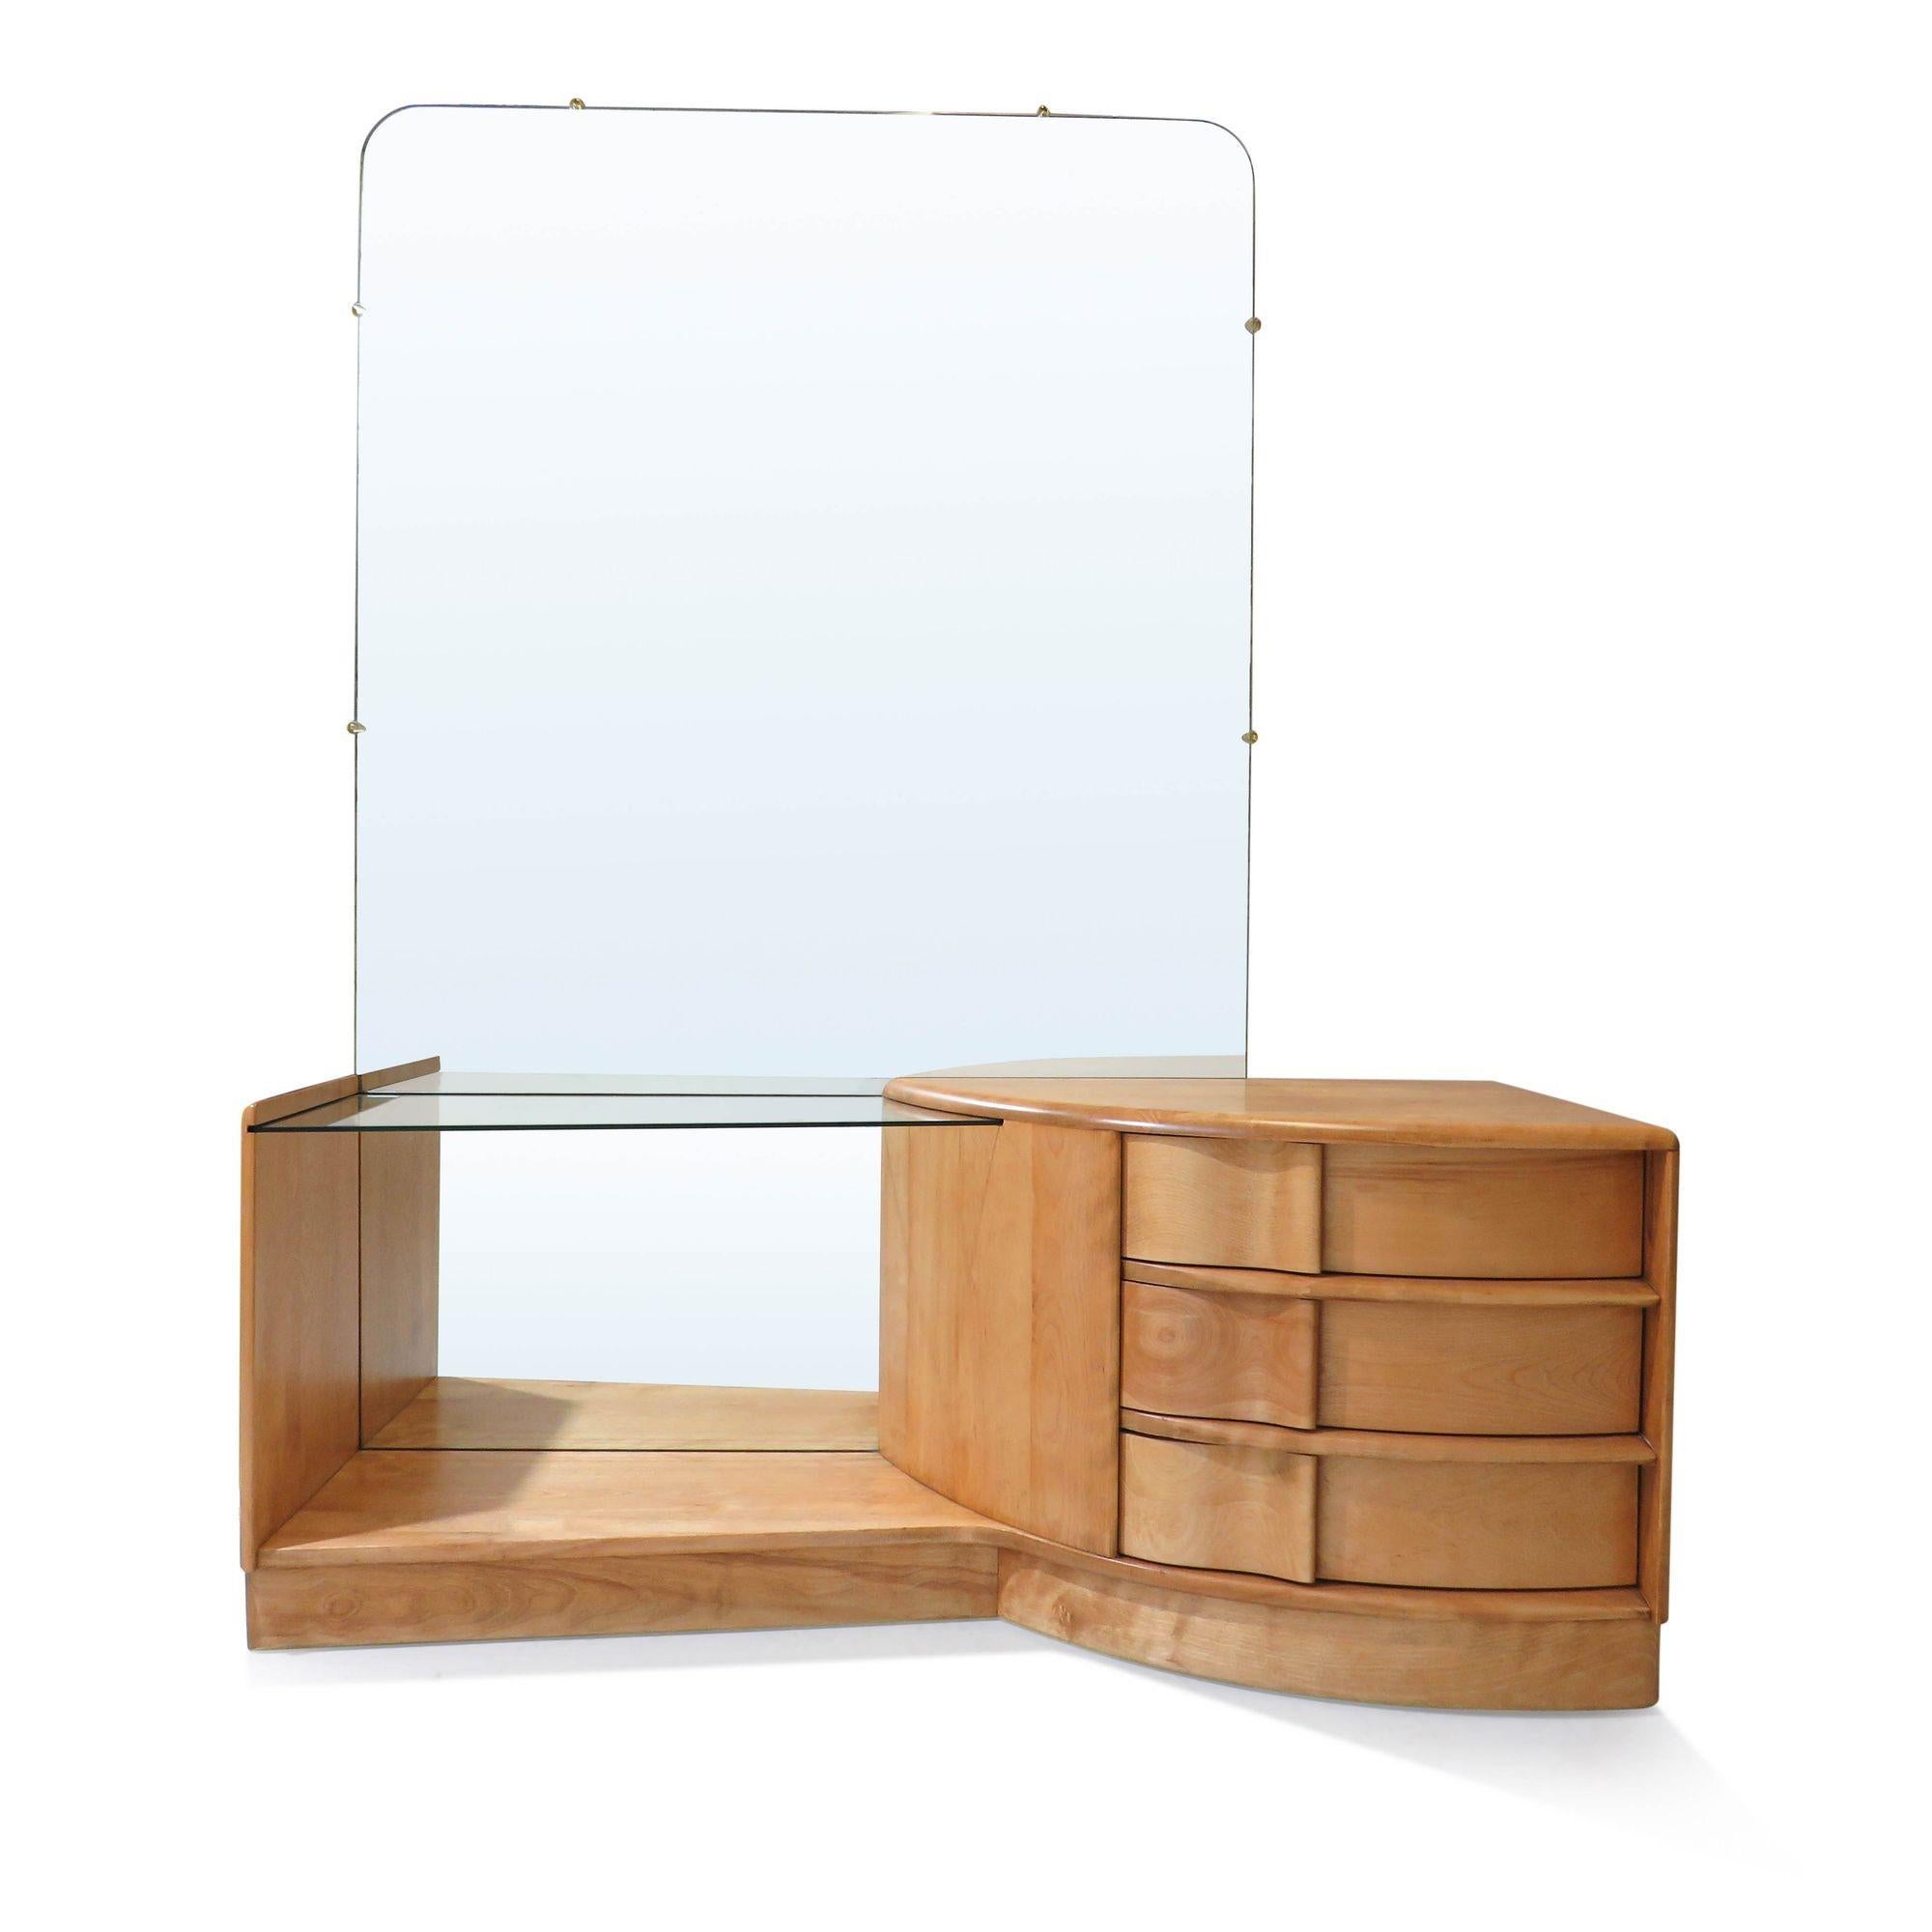 Beautifully restored Midcentury Heywood Wakefield Sculptura vanity with mirror crafted of solid maple with three drawers and glass shelf, and large mirror.

The wood has been completely restored and is in near perfect condition. 
Measurements:
W